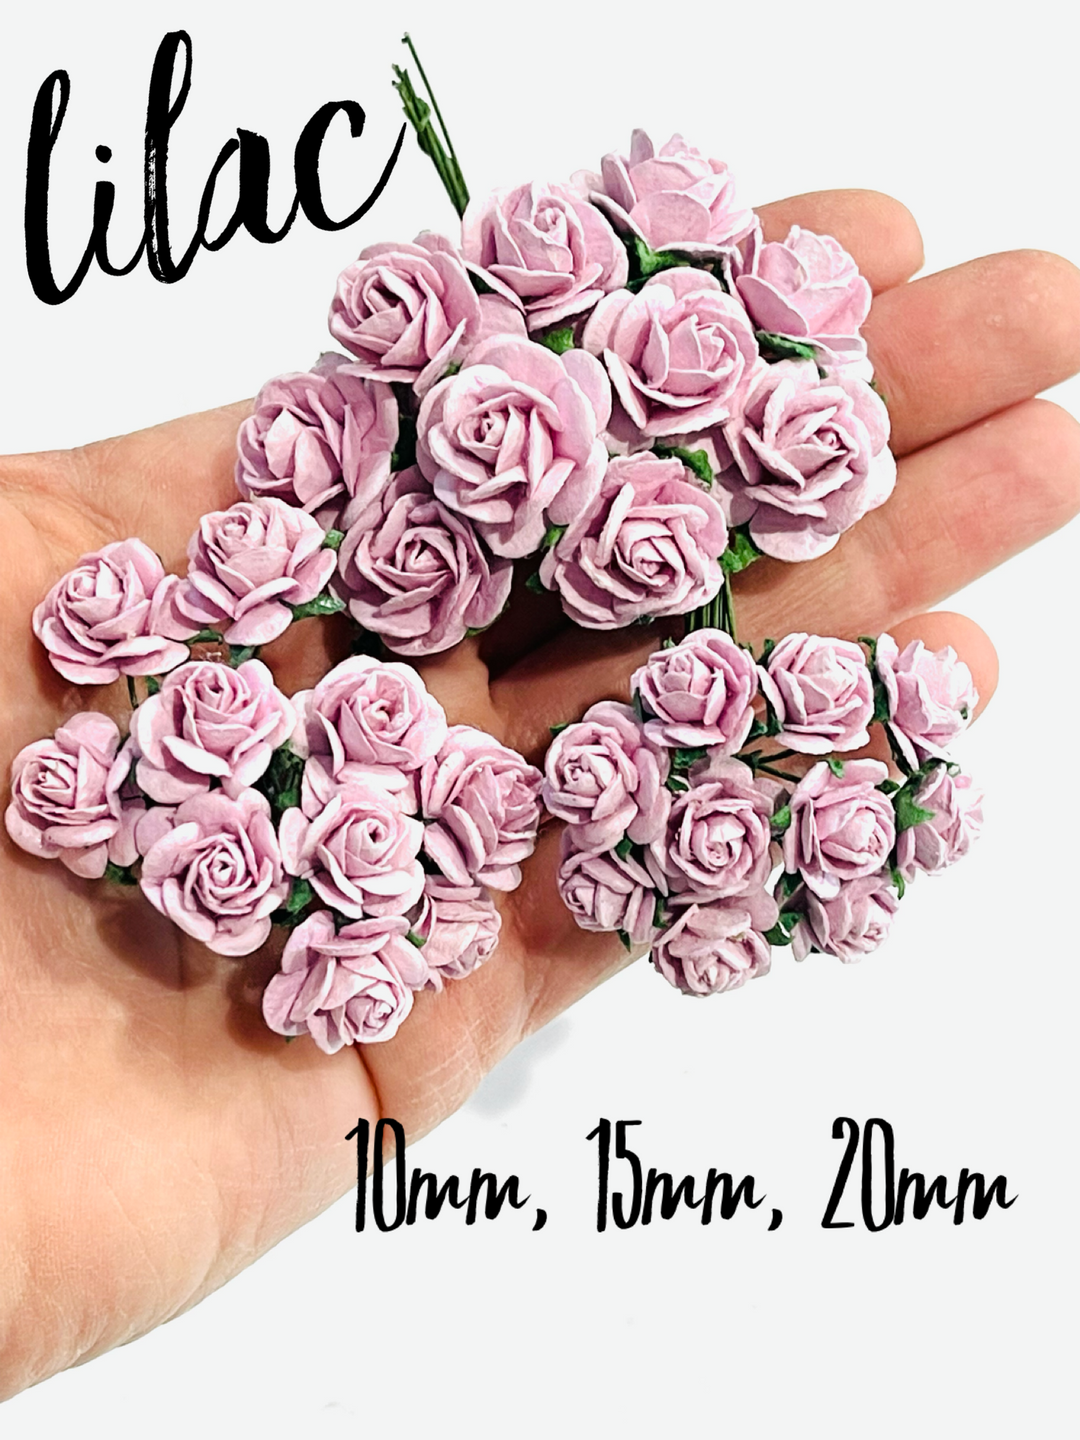 Lilac Mulberry Paper Roses - 10mm, 15mm, 20mm